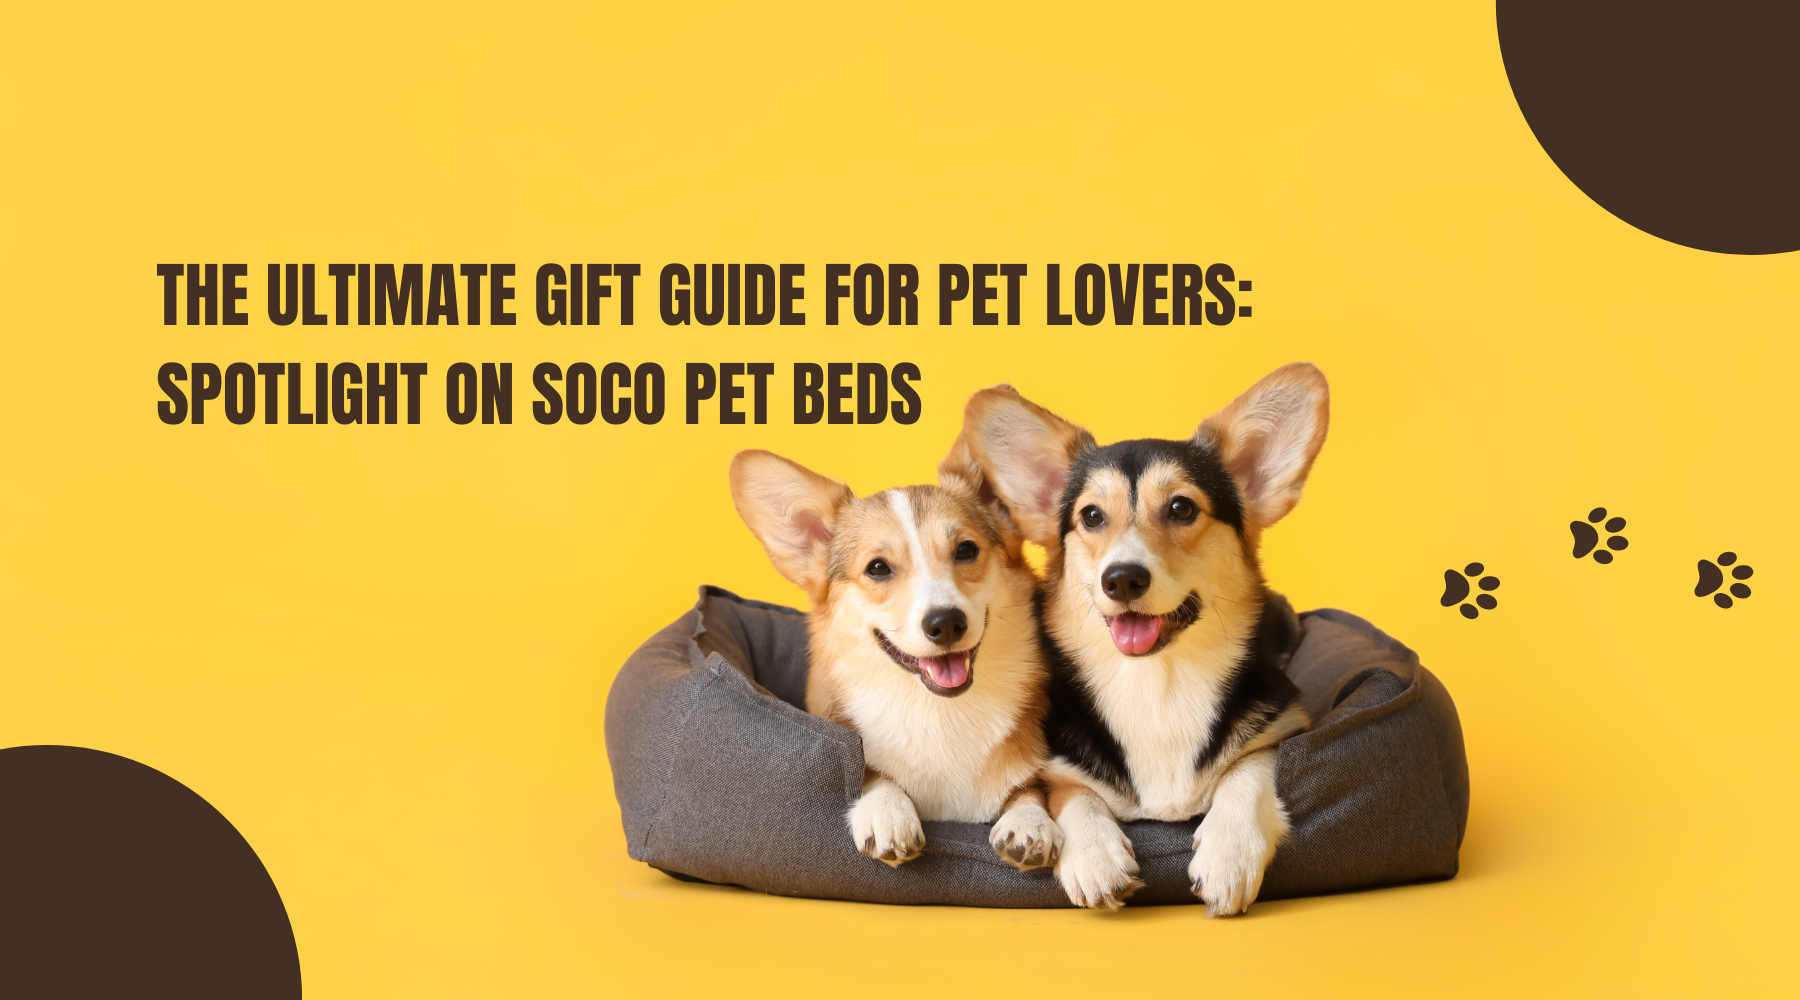 The Ultimate Gift Guide for Pet Lovers: Spotlight on Soco Pet Beds